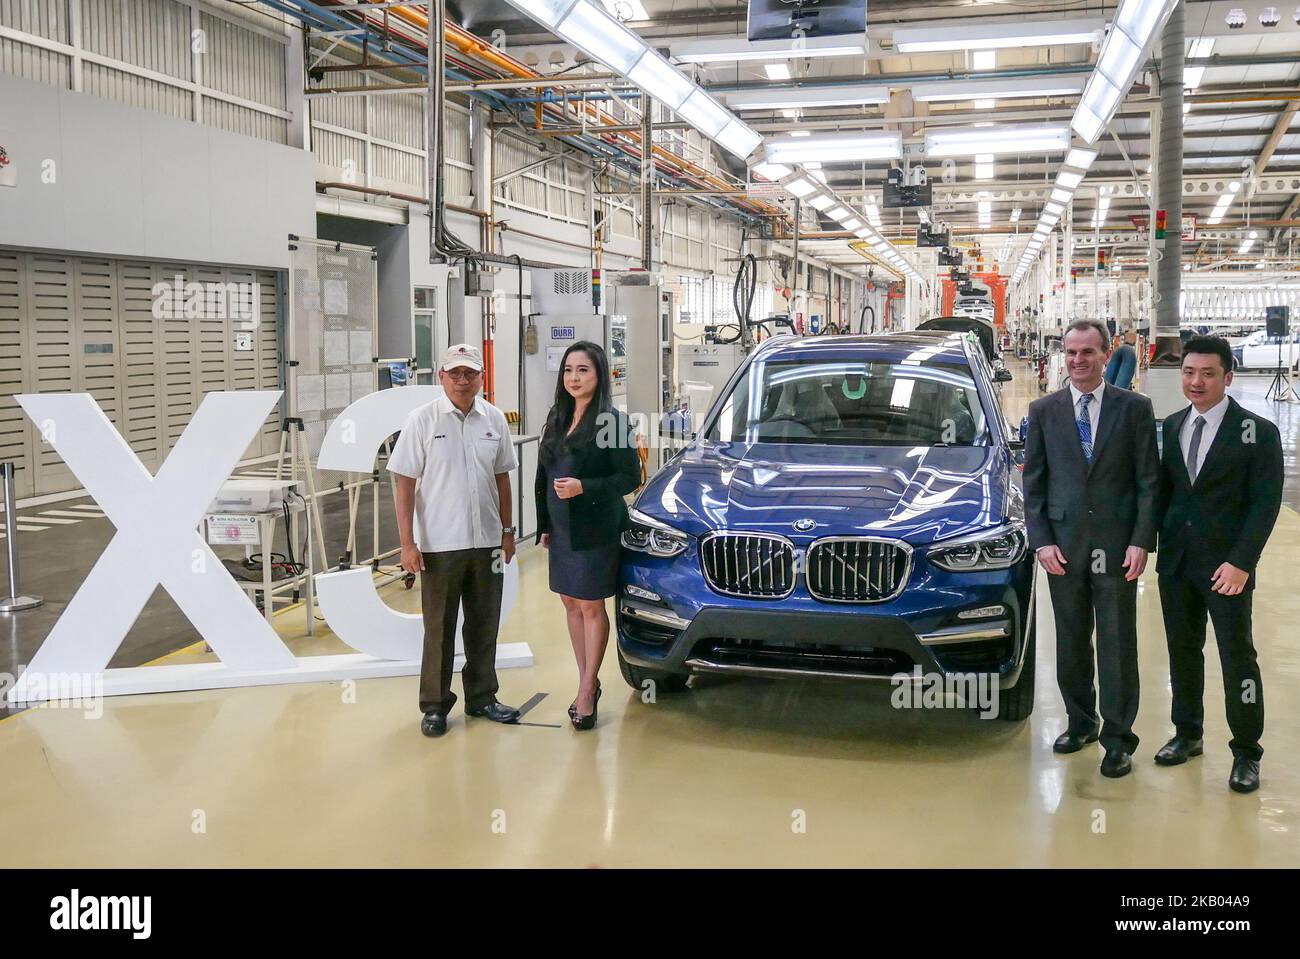 President Director PT Gaya Motor Ary Mariano, Vice-president communication BMW Indonesia Jodie O’tania and BMW Production Network Manager, Albert Reichl (L to R) pose with BMW X3 at PT Gaya Motor manufacture in Jakarta, Indonesia on July 18, 2018. BMW X3 is a sports activity vehicle assembly by PT Gaya Motor in Indonesia since 2012 and ready to sell on August 2018 for IDR 1.009.000.000. (Photo by Anton Raharjo/NurPhoto) Stock Photo